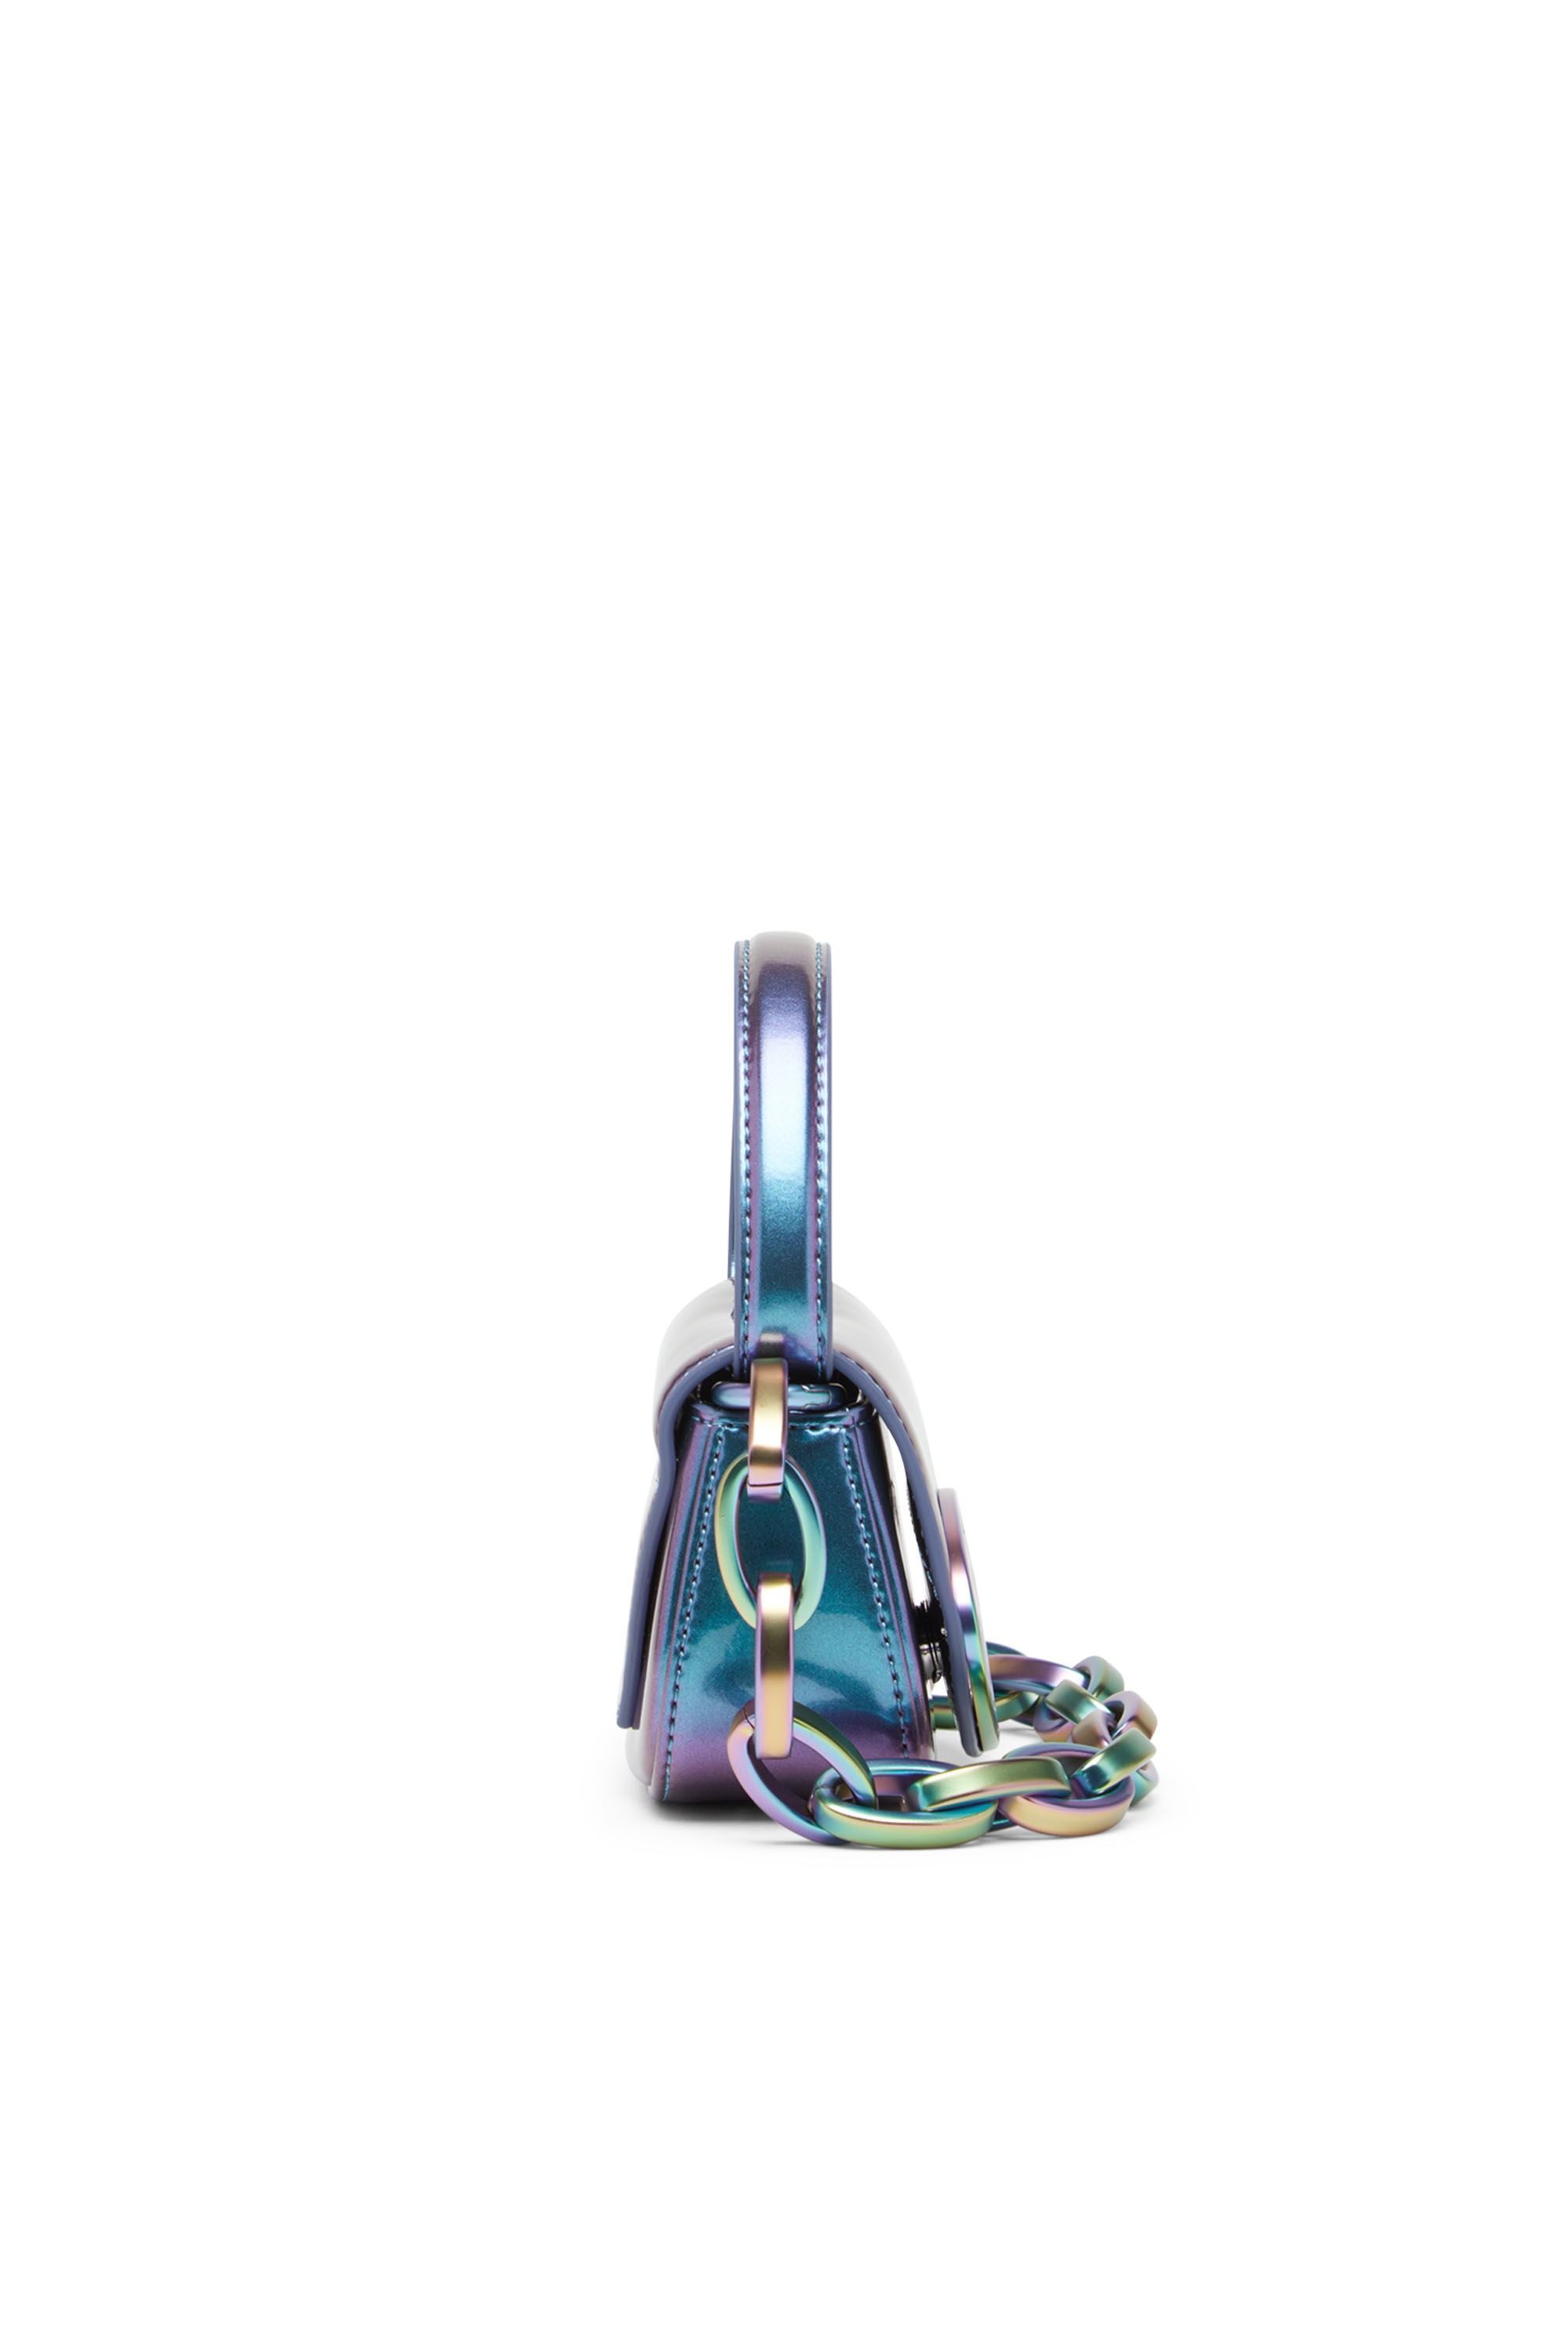 Diesel - 1DR XS, Woman 1DR XS-Iconic iridescent mini bag in Blue - Image 4